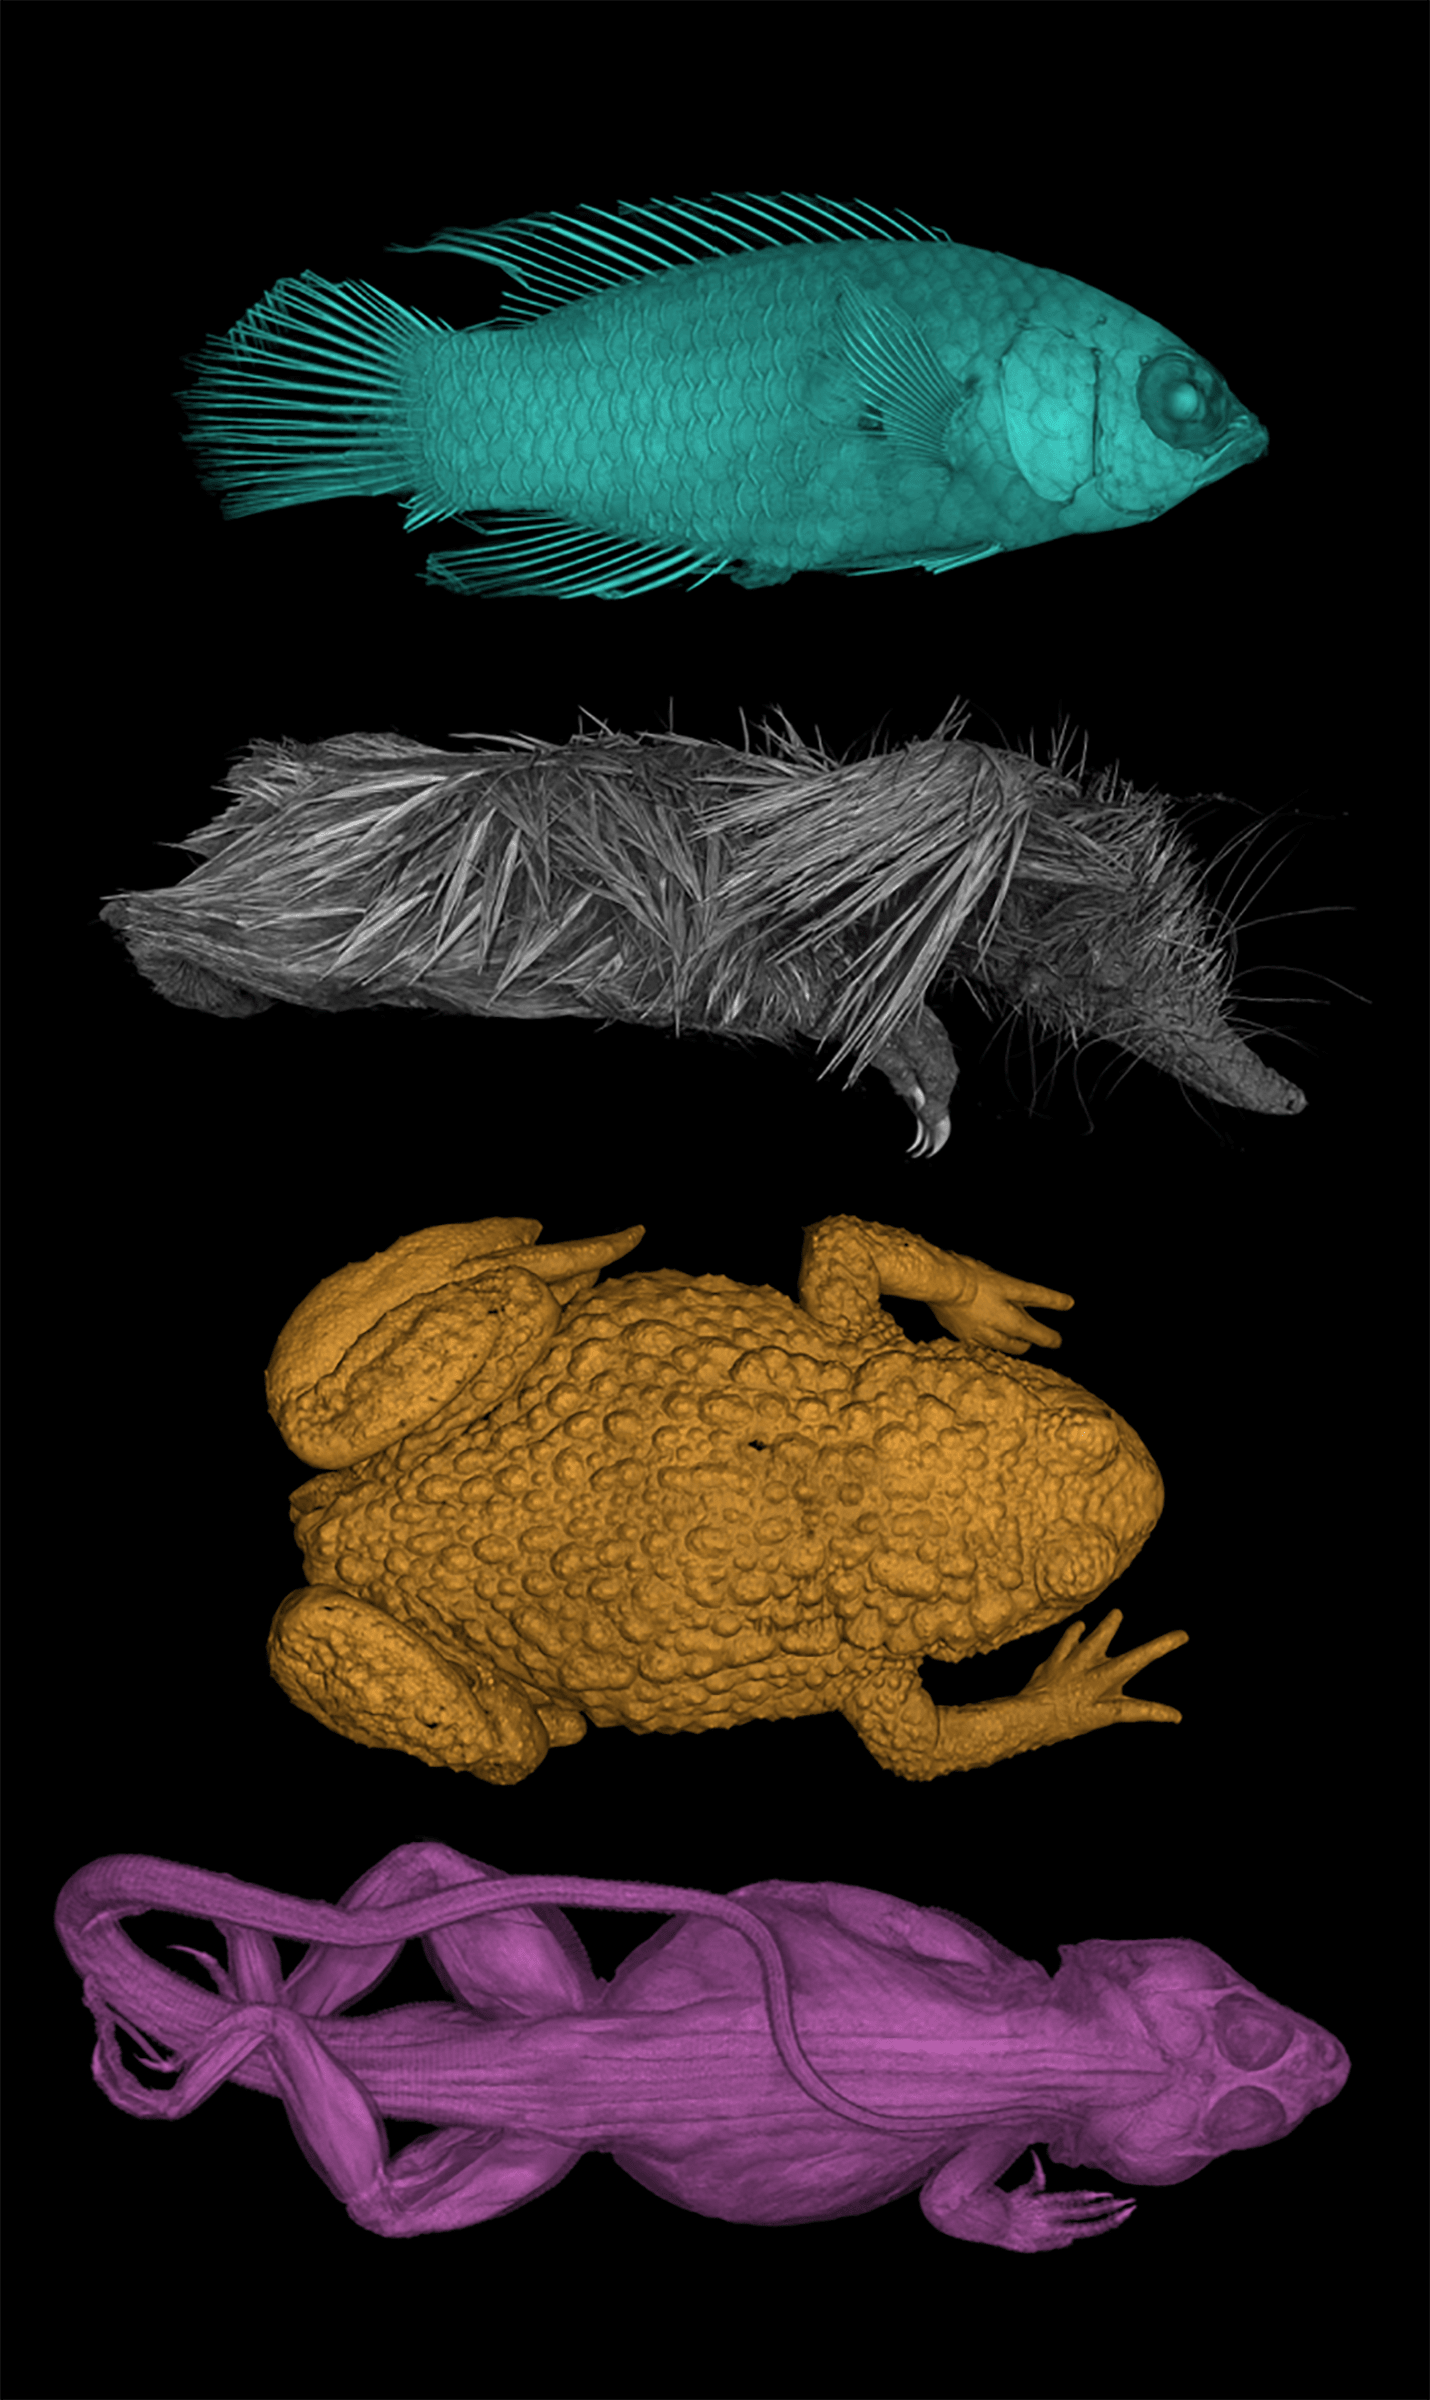 From top to bottom, a fish (basslet), rendered in green-blue, a tenrec, rendered in grey, a fire bellied toad in yellow, a collared lizard in pink